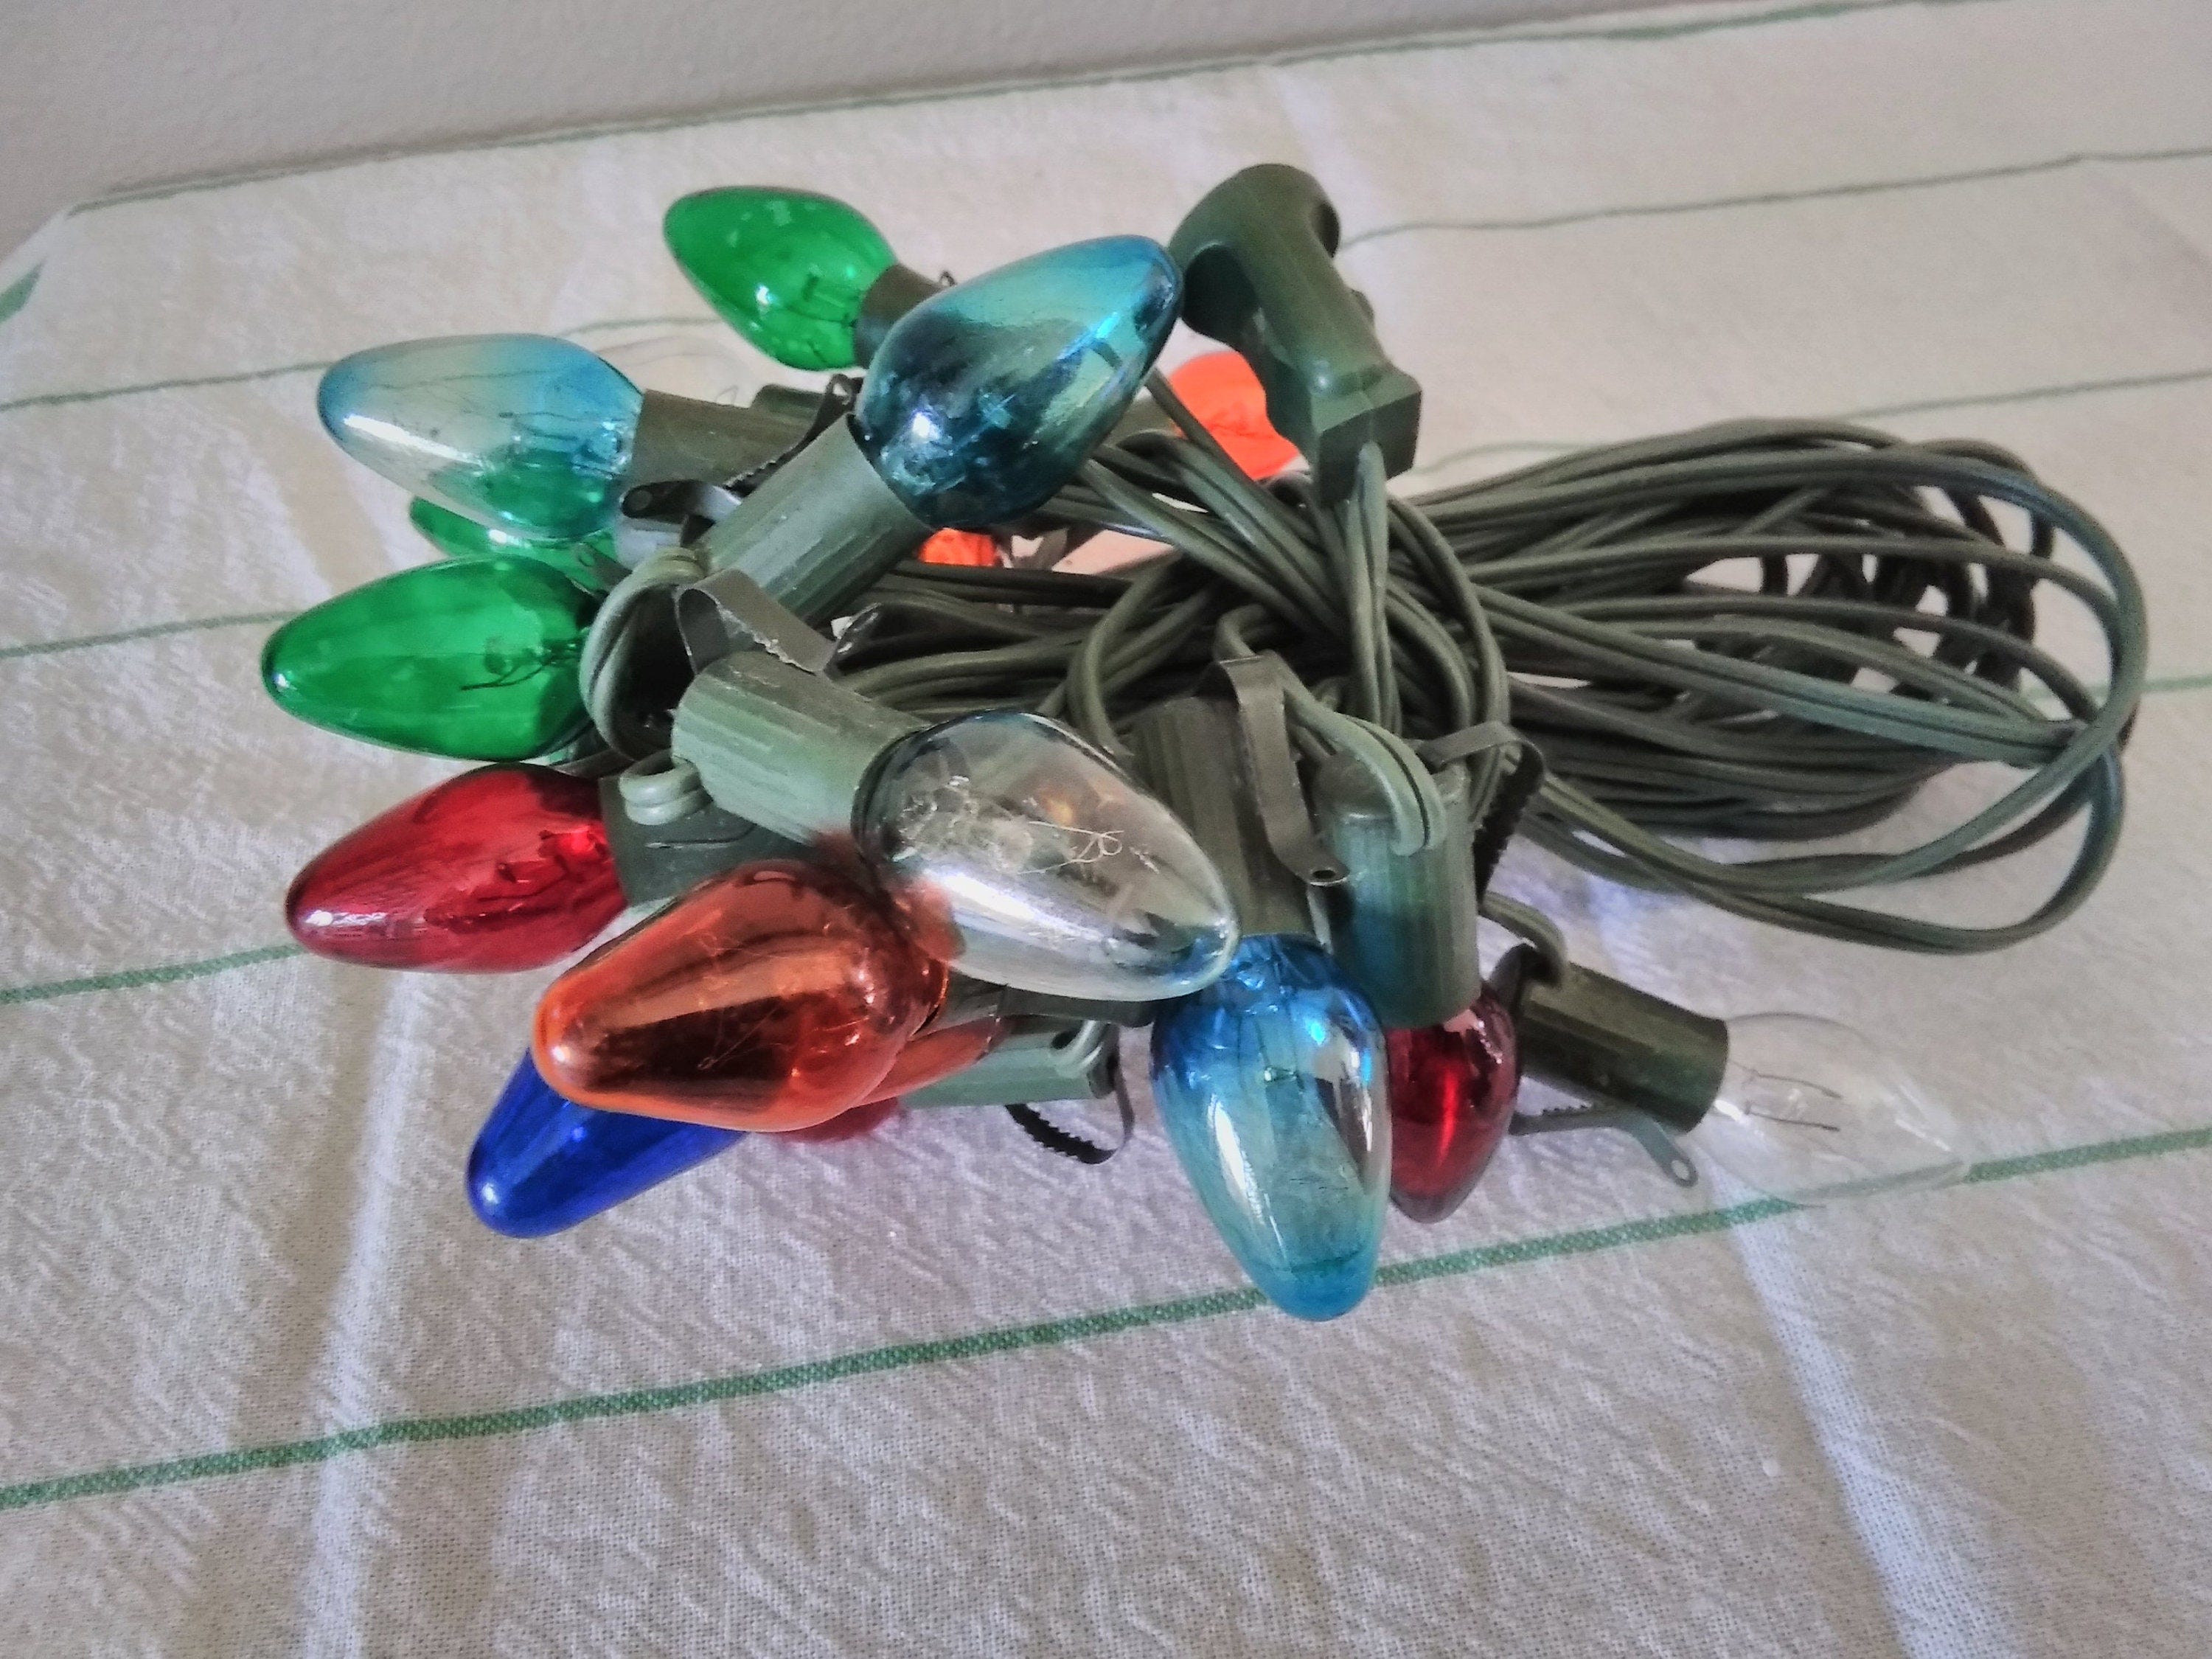 Vintage C7 GE cord with 20 bulbs in good working condition, plus extra bulbs, please see all pictures, to brighten your winter nights!